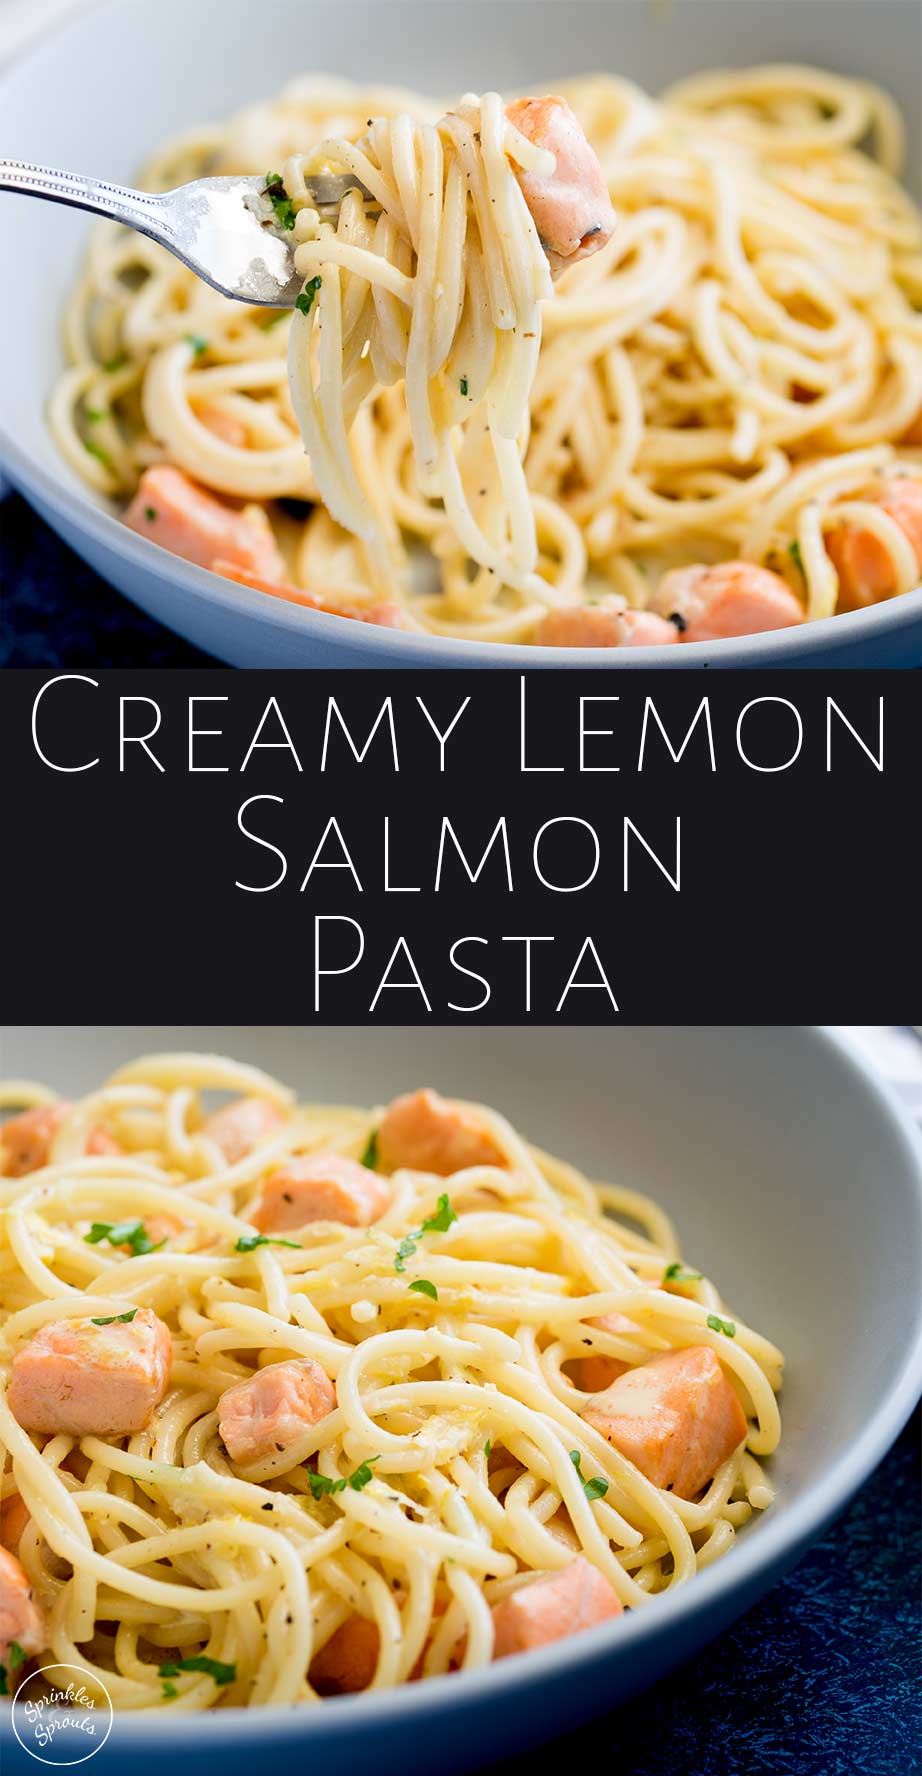 two pictures of the salmon pasta with text in the middle